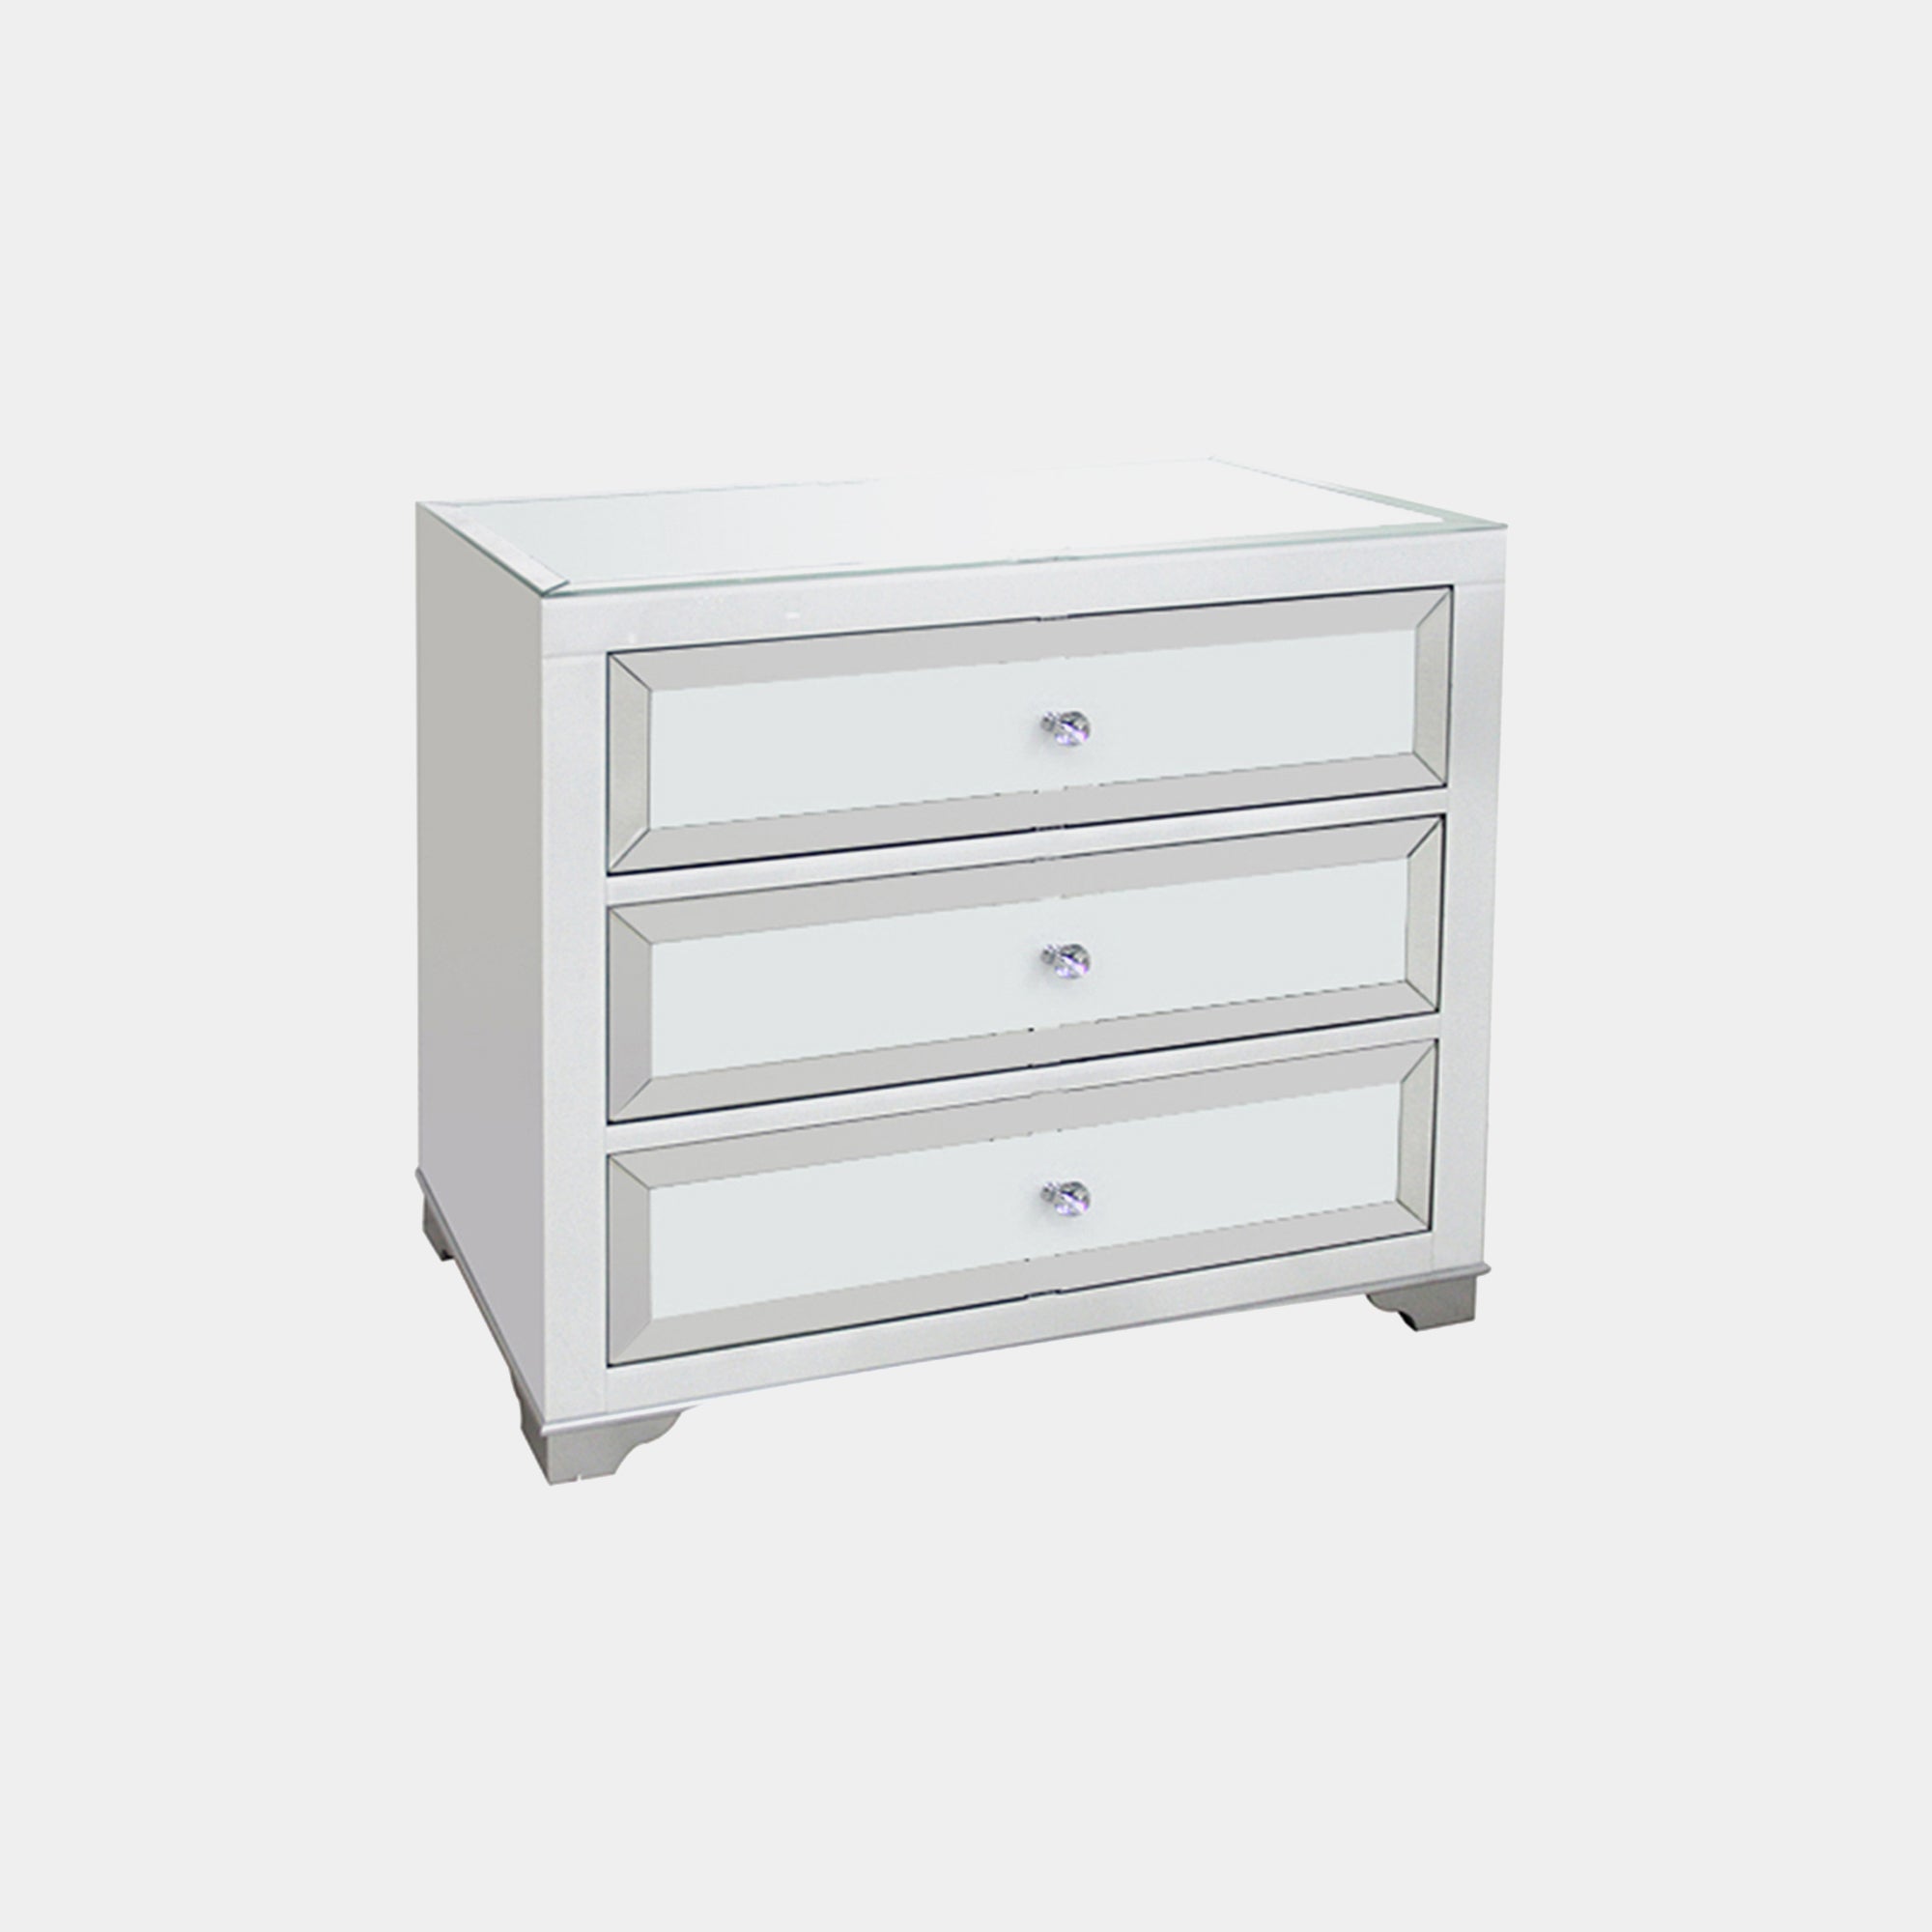 3 Drawer Wide Chest Mirrored Silver & White